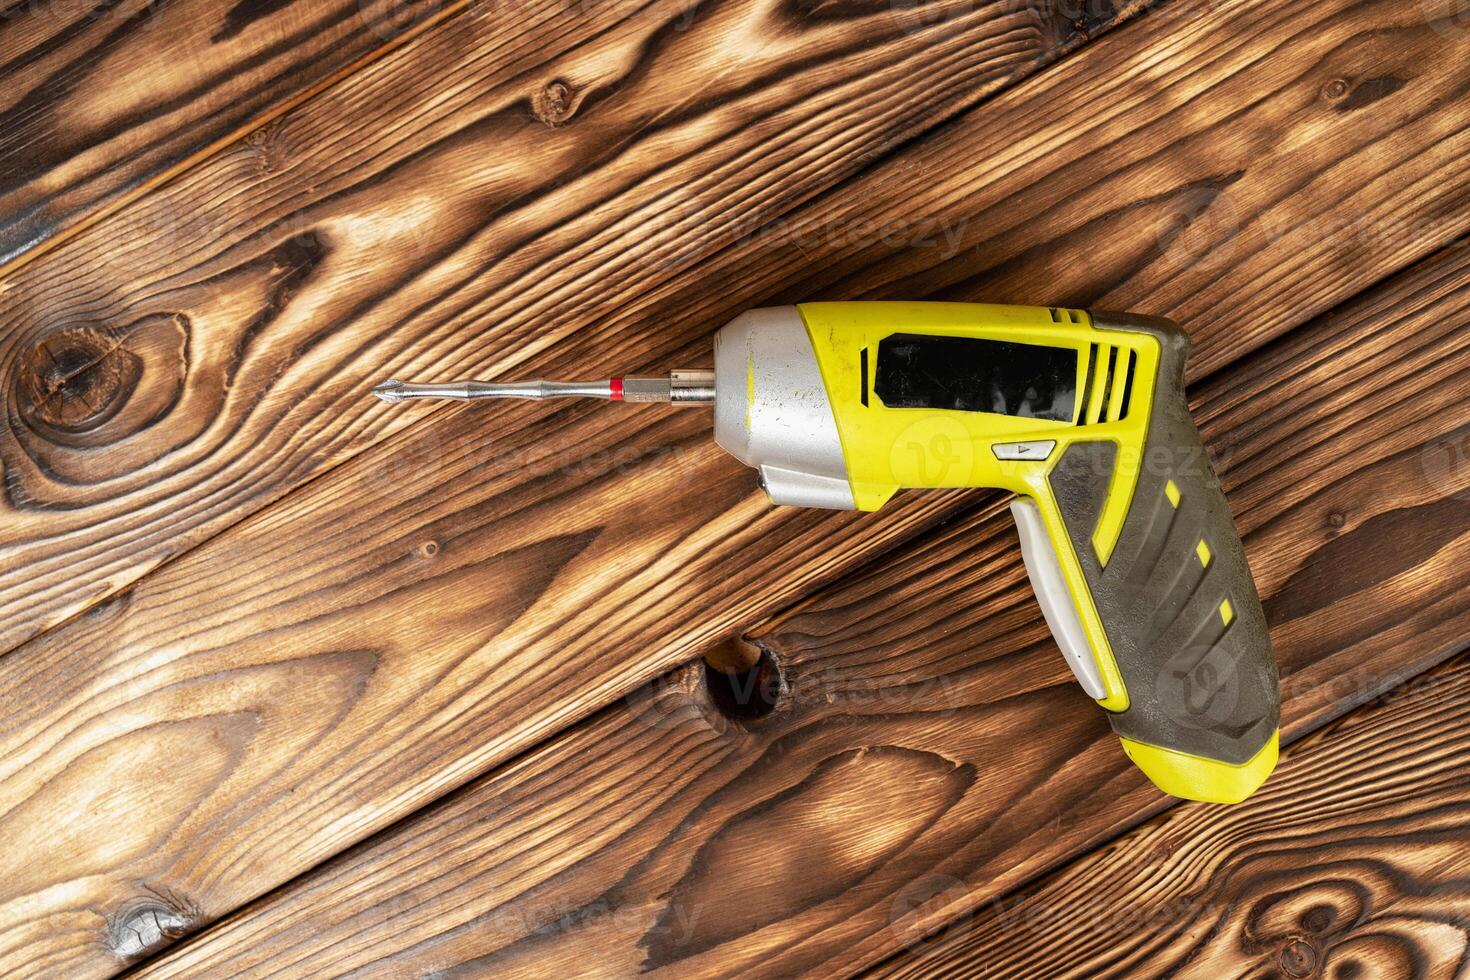 a cordless screwdriver. Cordless drill on a wooden background. DIY concept photo